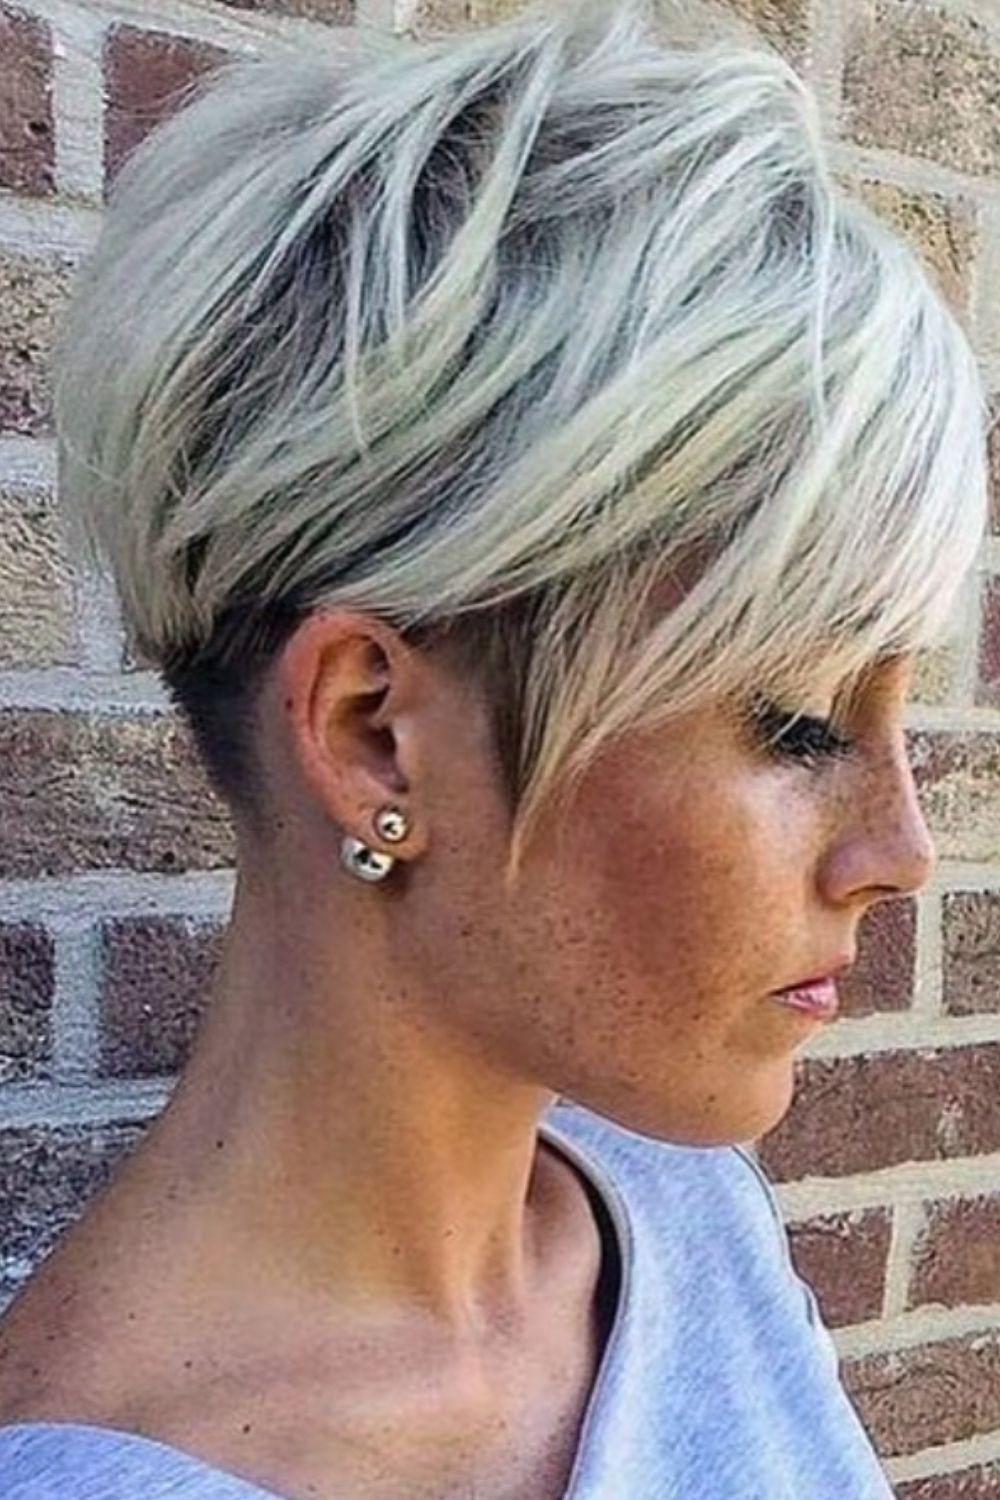 45 Best Undercut pixie haircuts for cool women to try 2021!